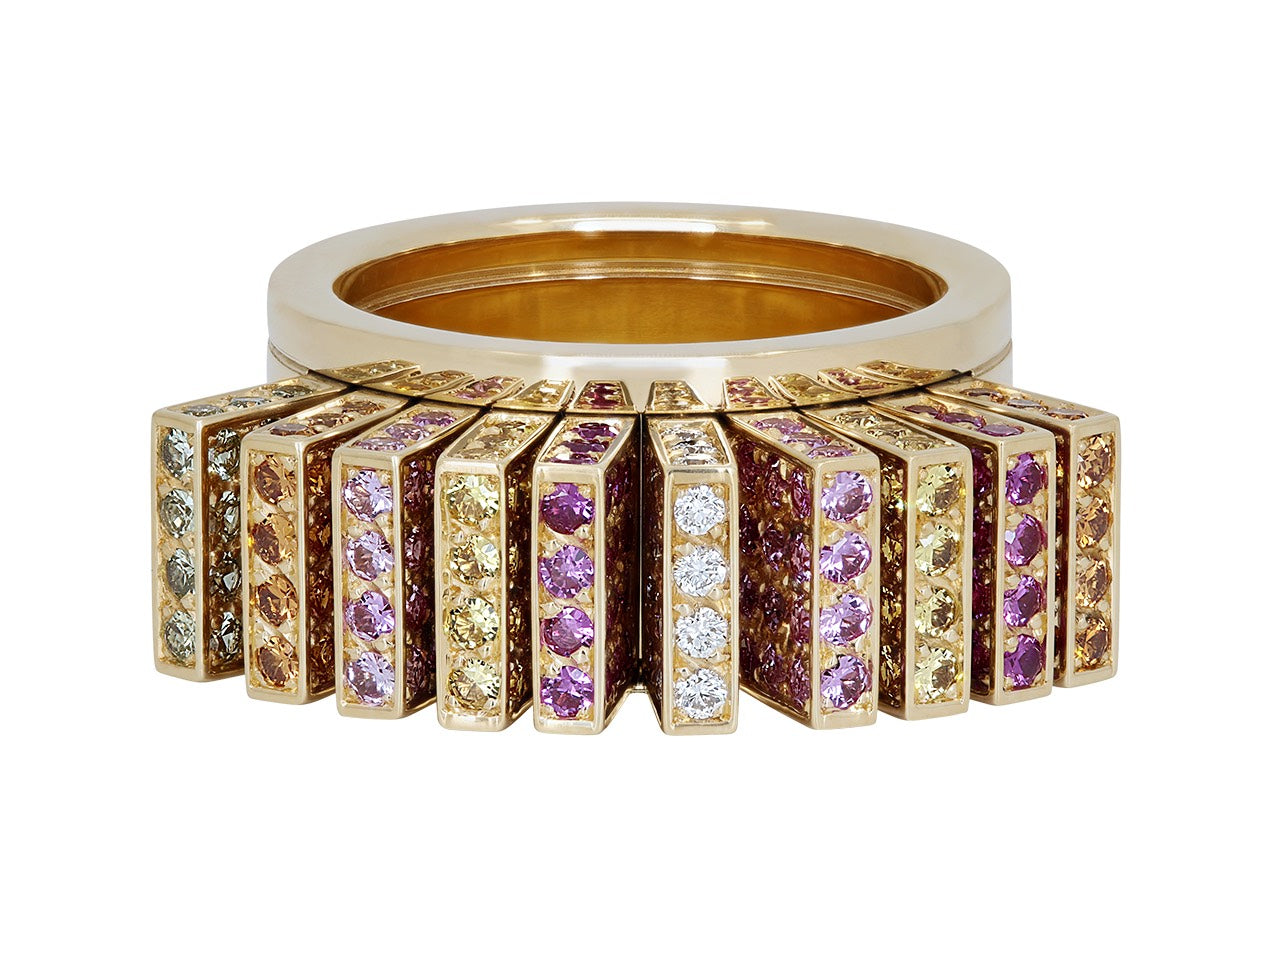 Cartier 'Collection Délices de Cartier' Sapphire and Diamond Fan Ring in 18K Gold